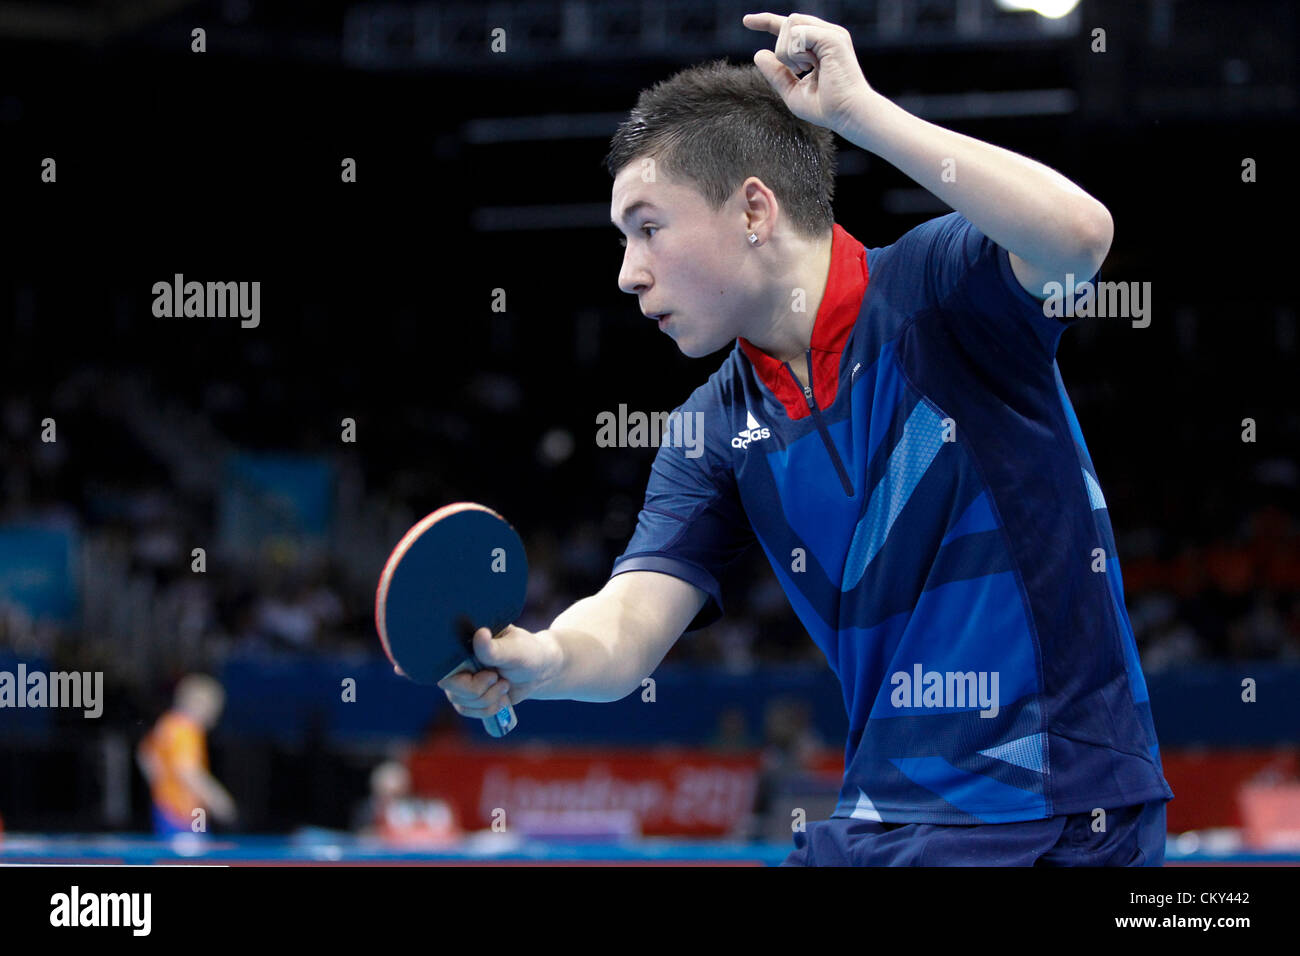 01.09.2012 London, England. Ross WILSON (GBR) in action during his quarter final victory over Marcin SKRZYNECKI (POL) in the men's singles class 8 on Day 3 of the men's table tennis from ExCel. Stock Photo